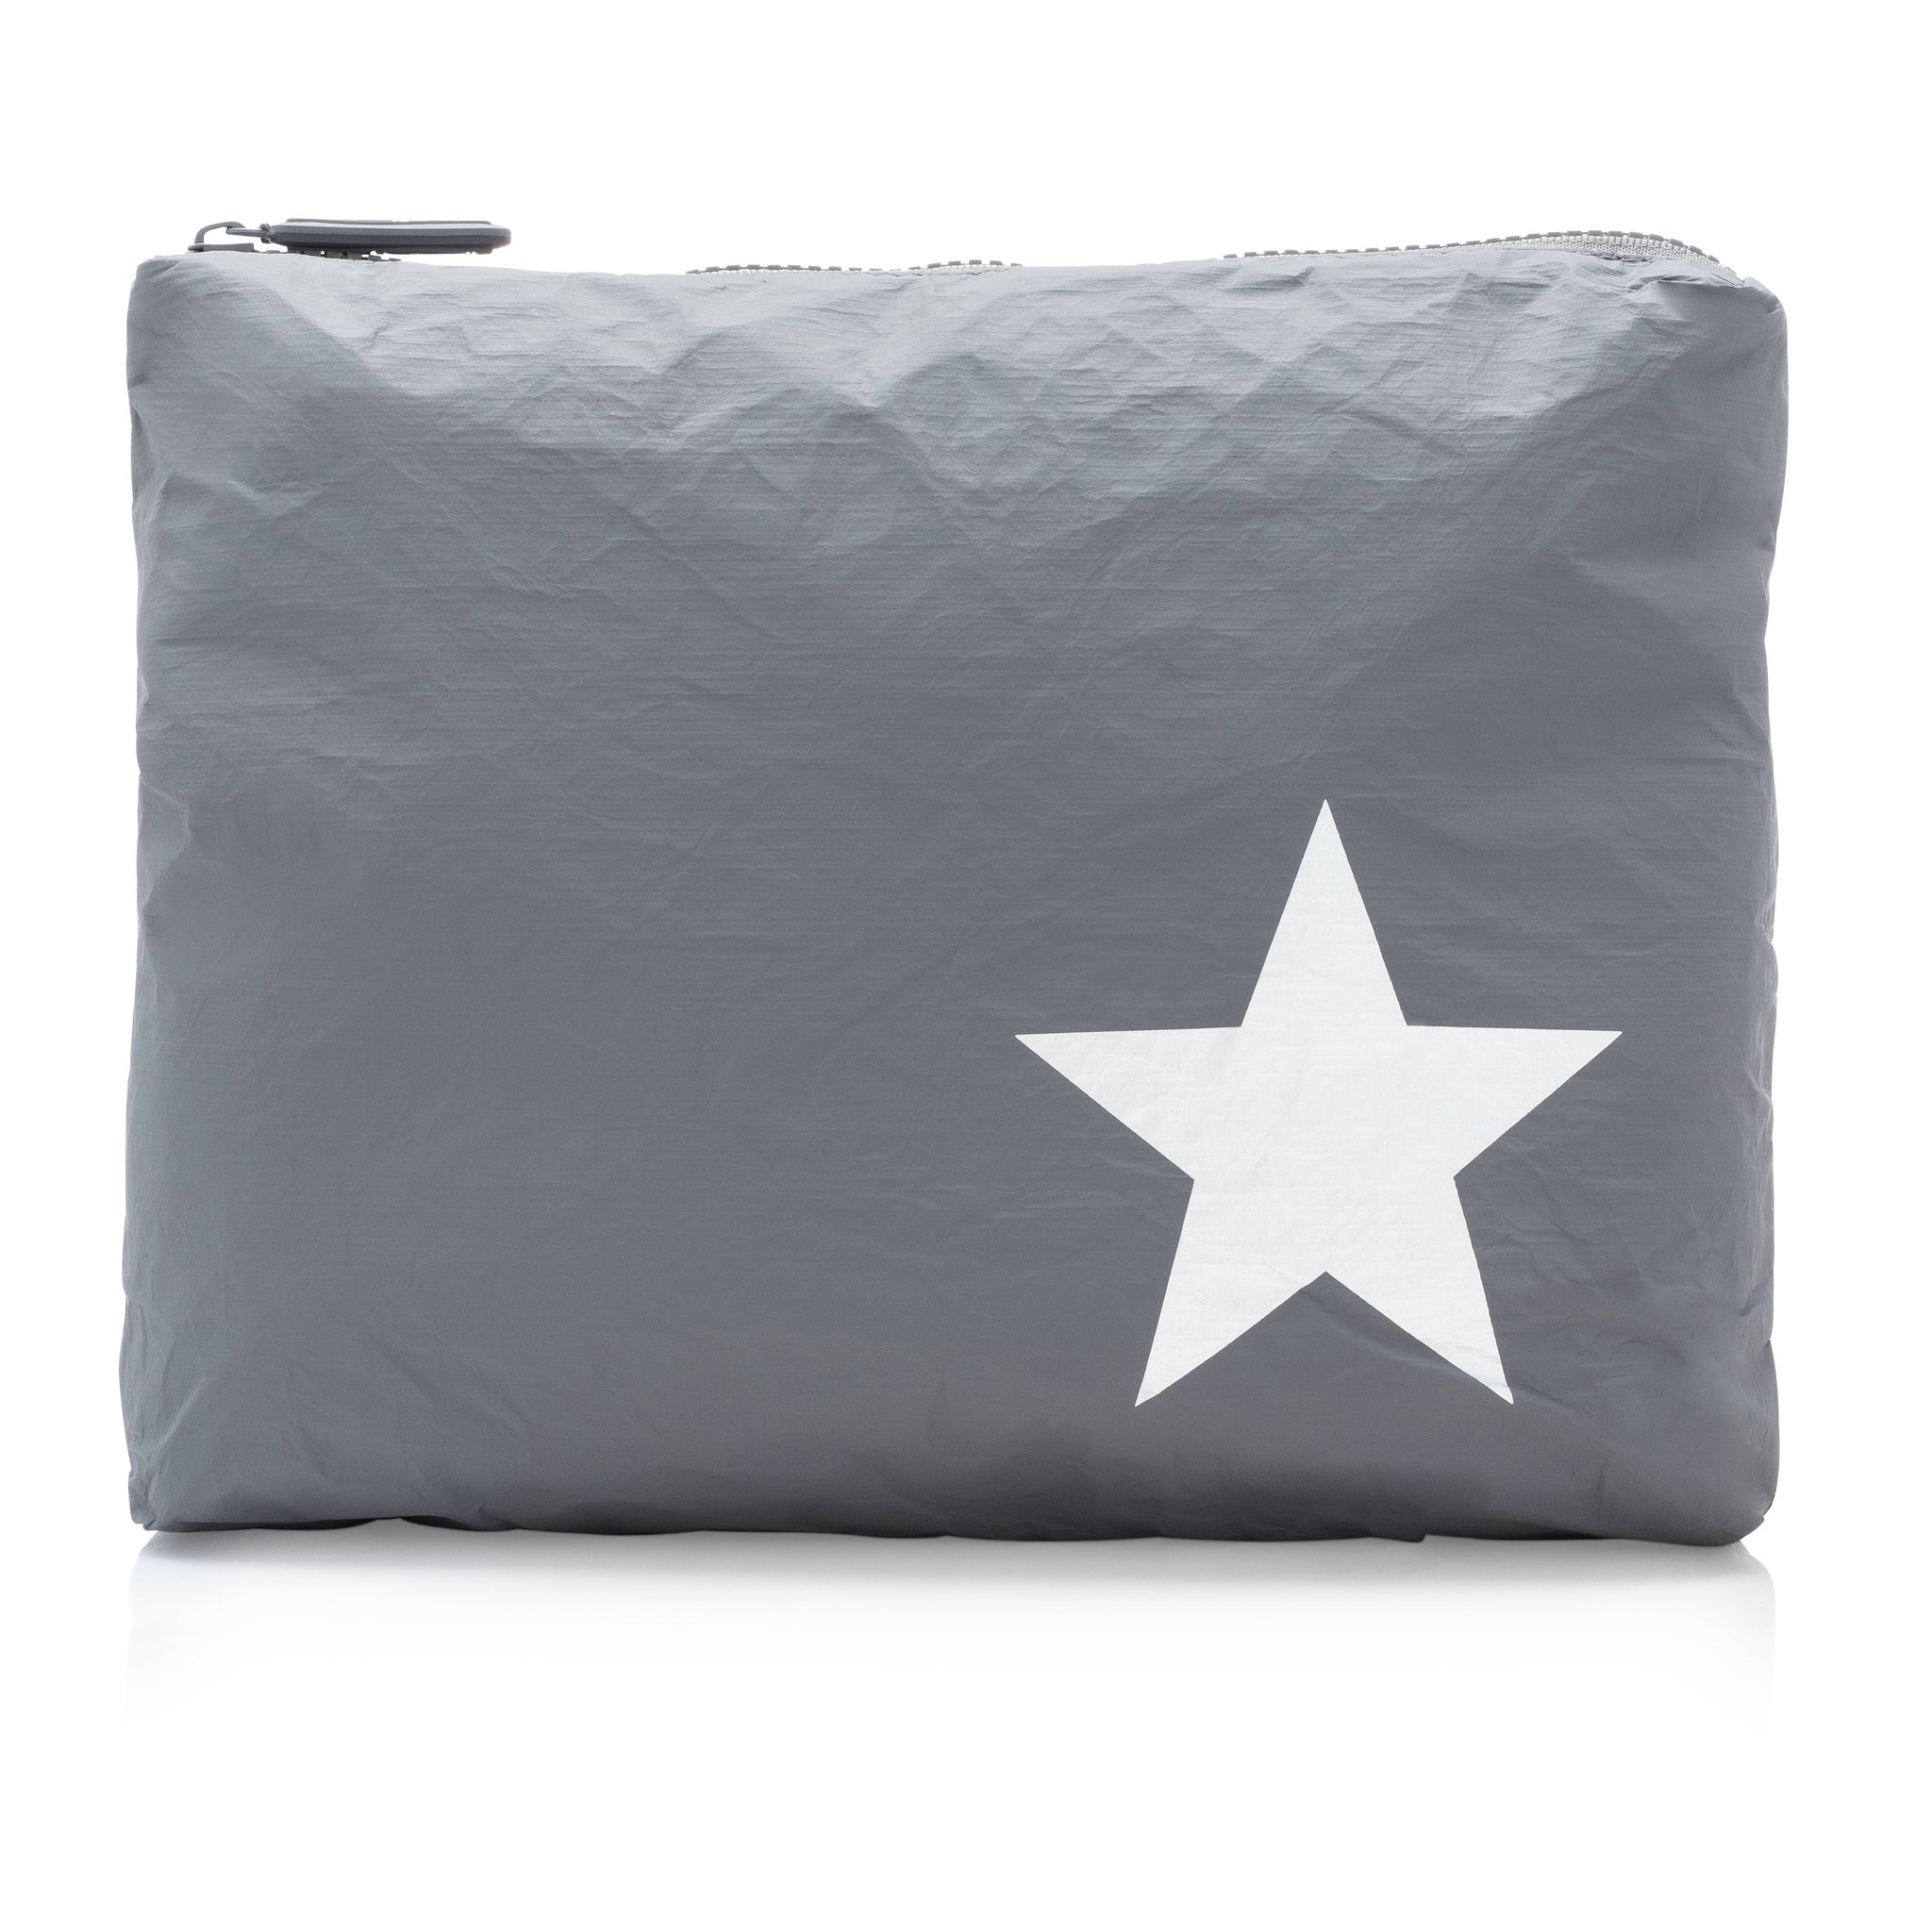 Travel Pack - Makeup Pouch - Medium Pack - Cool Gray with Metallic Silver Star